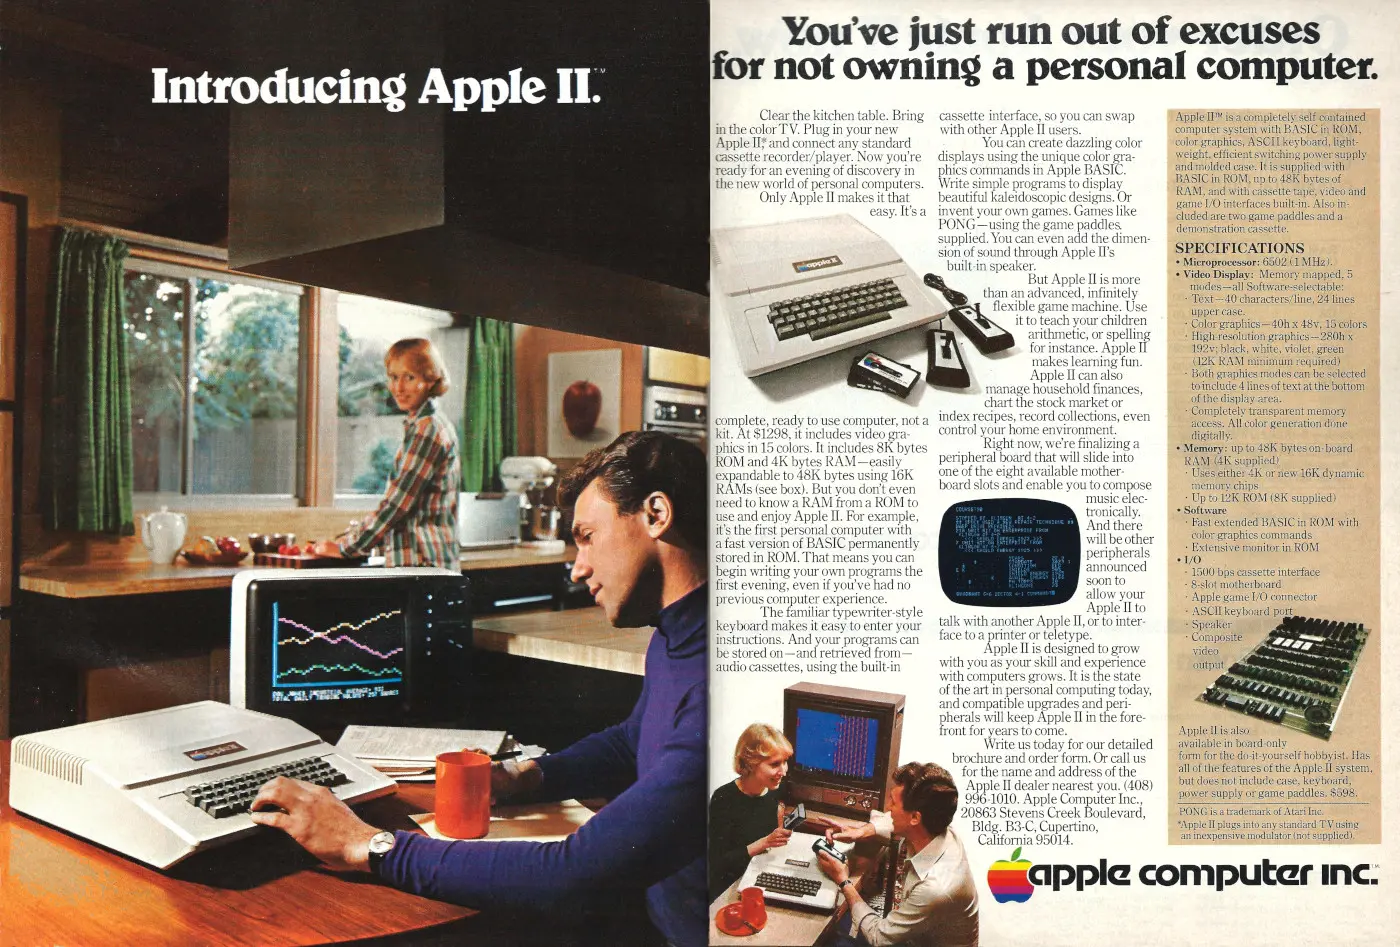 Apple Advert: Introducing Apple II - You've just run out of excuses for not owning a personal computer, from Byte - The Small Systems Journal, November 1977